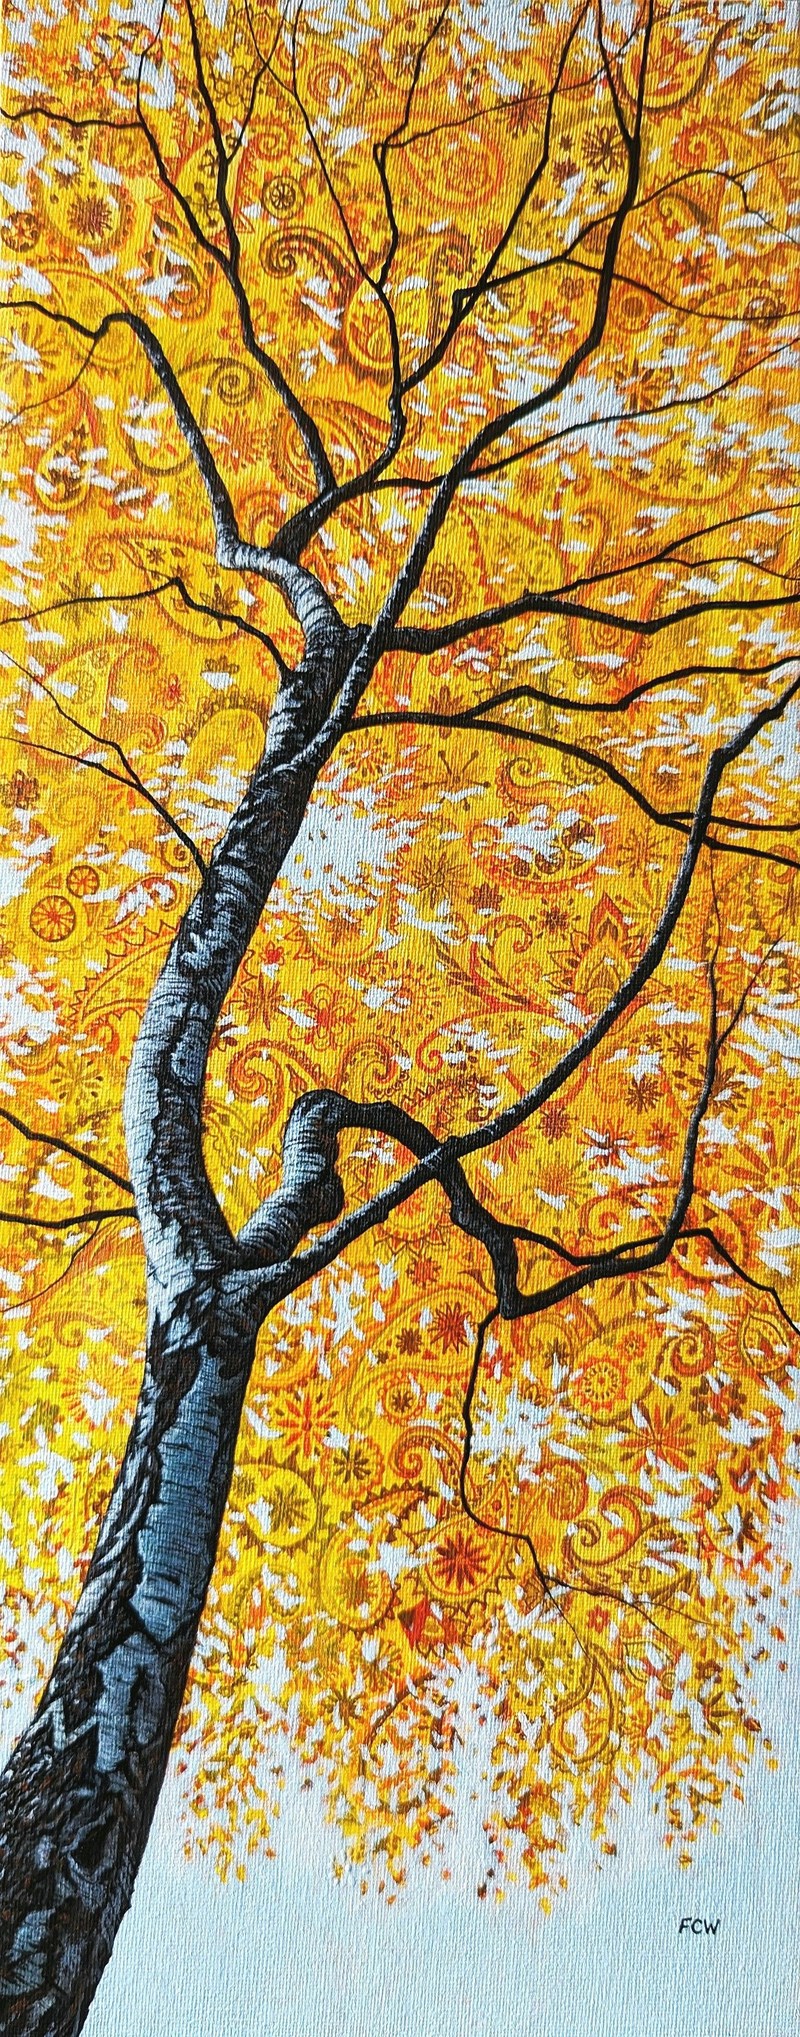 Silver Birch in Paisley Gold